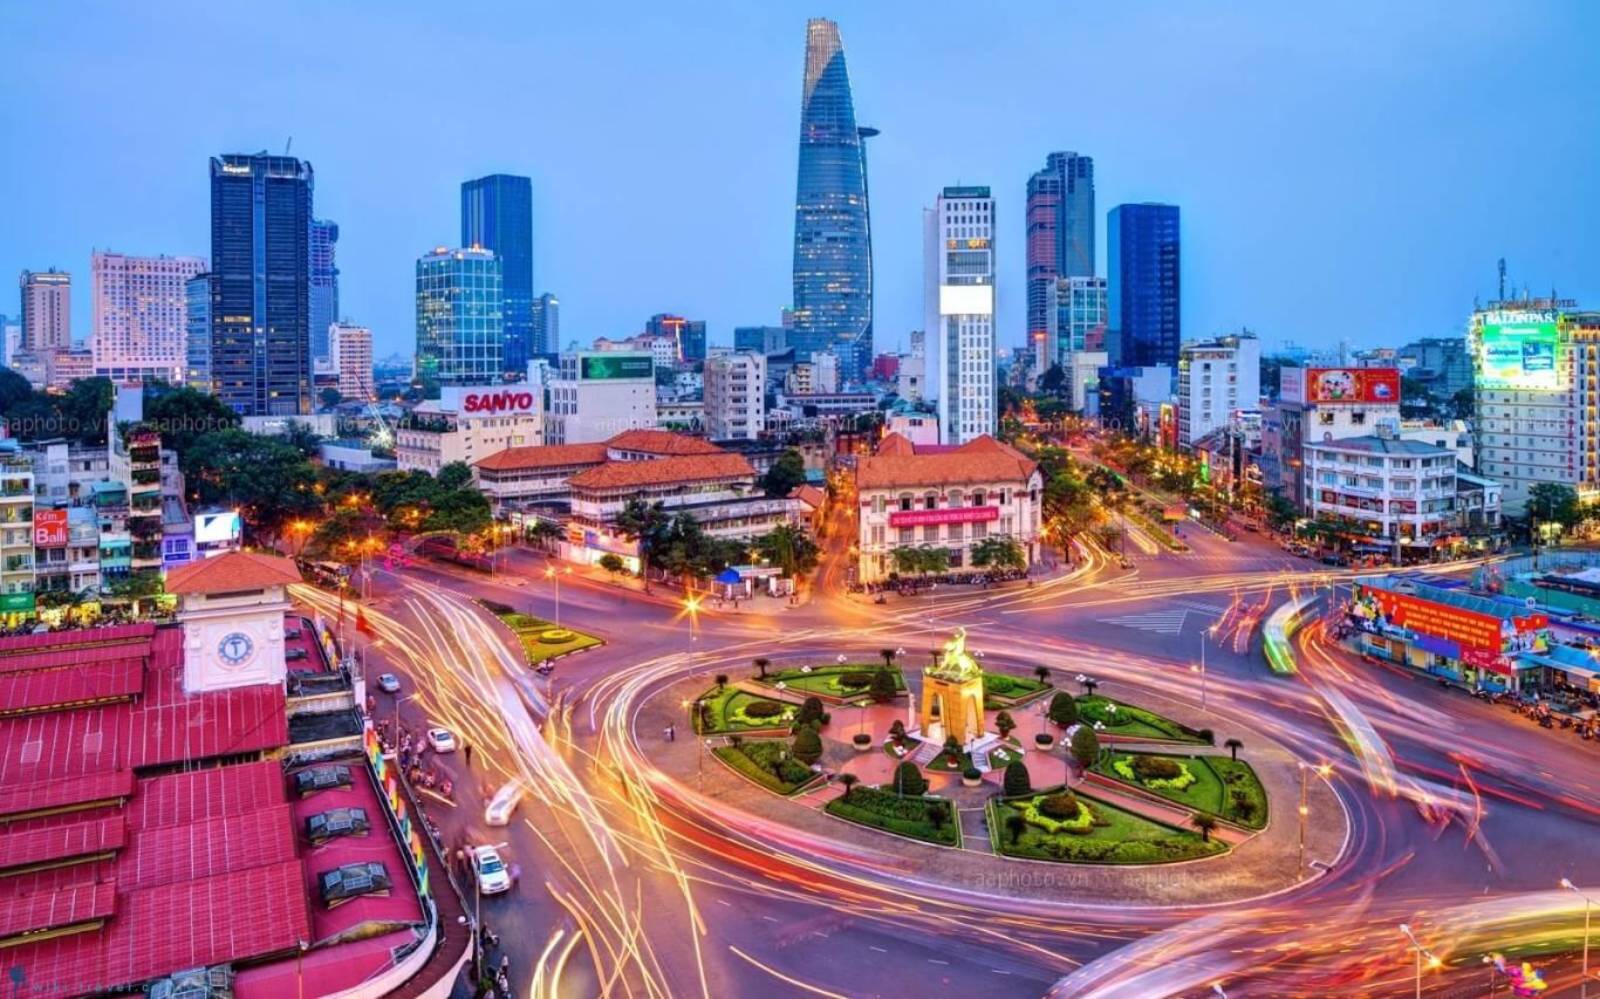 Tours starting from Ho Chi Minh City